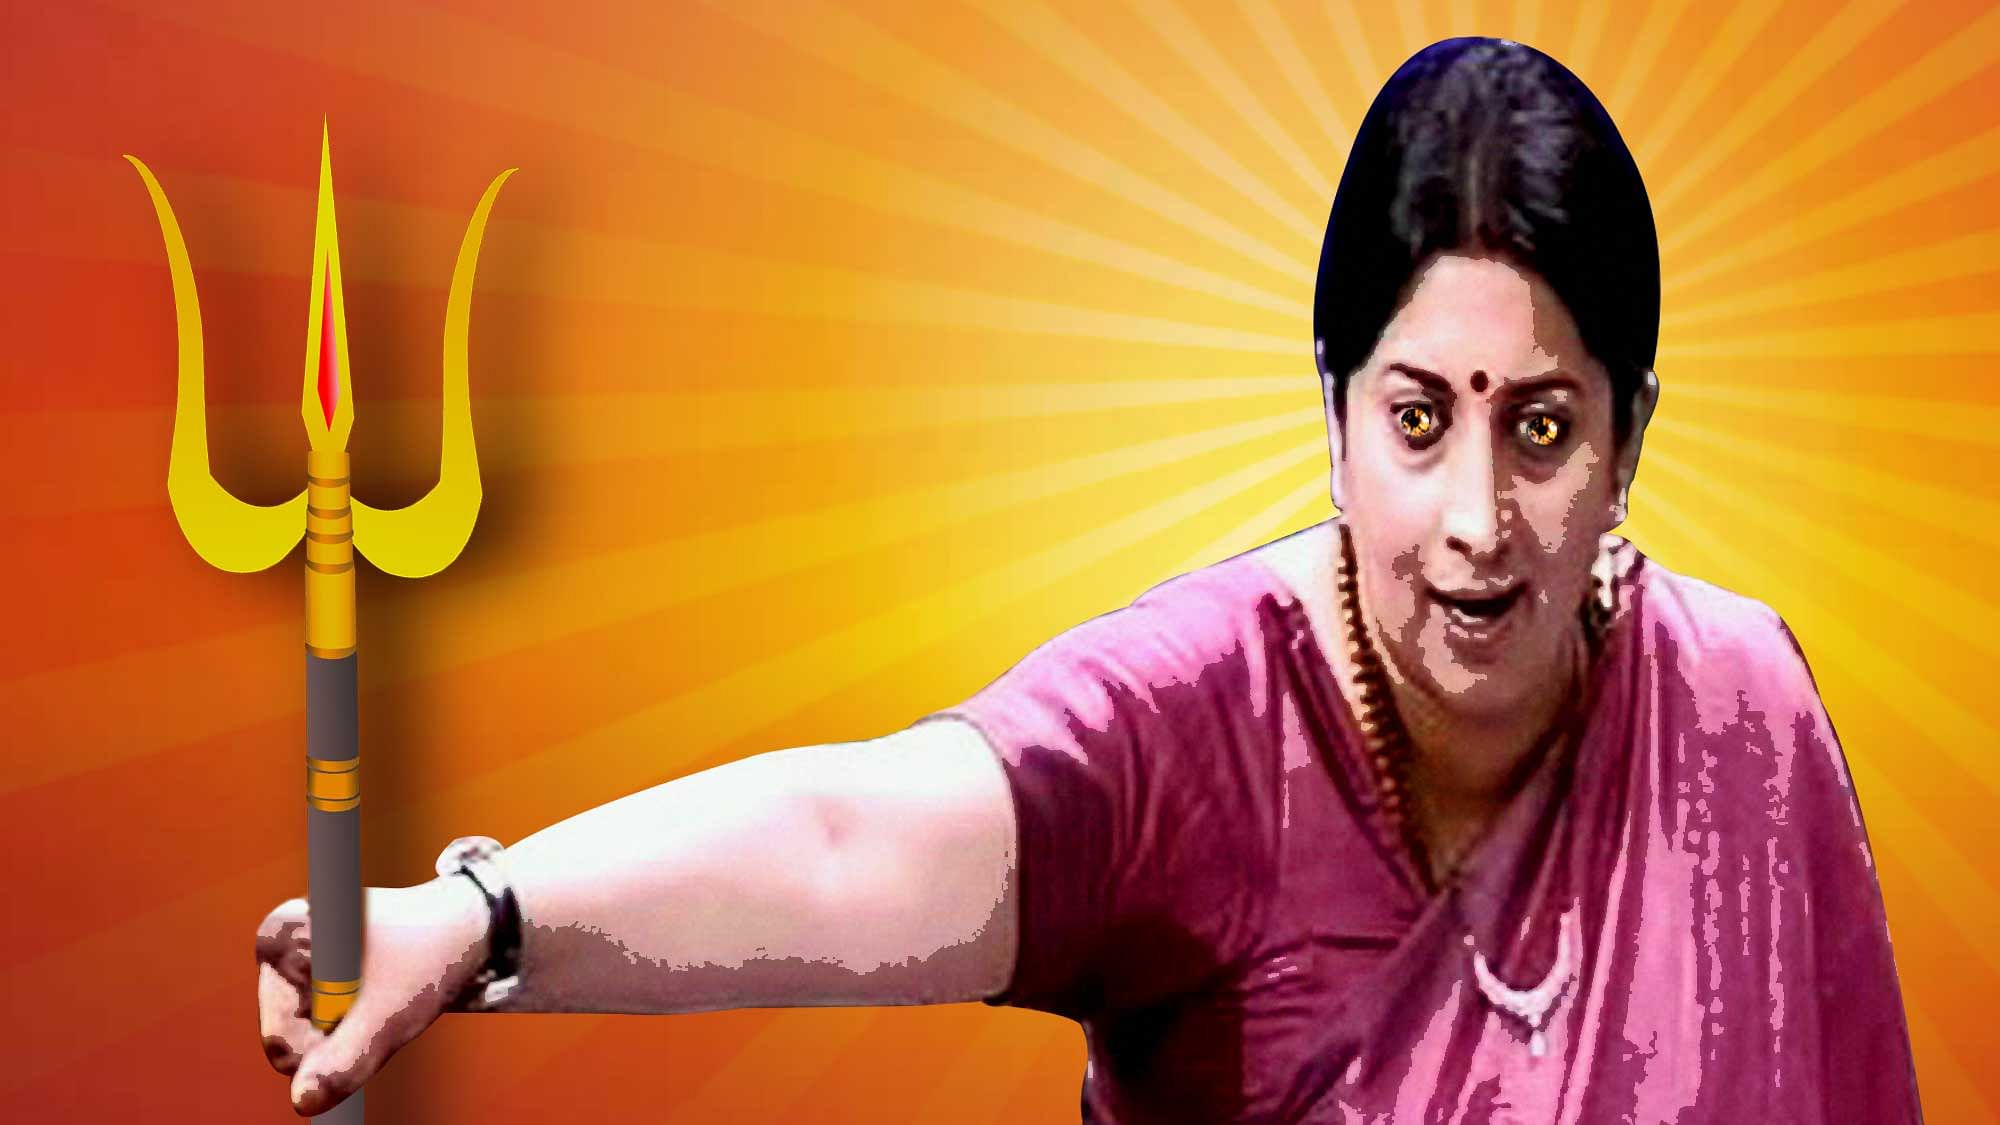 Smriti Irani expressed her displeasure at insults to the godess Durga in Parliament. (Photo: Image altered by <b>The Quint</b>)